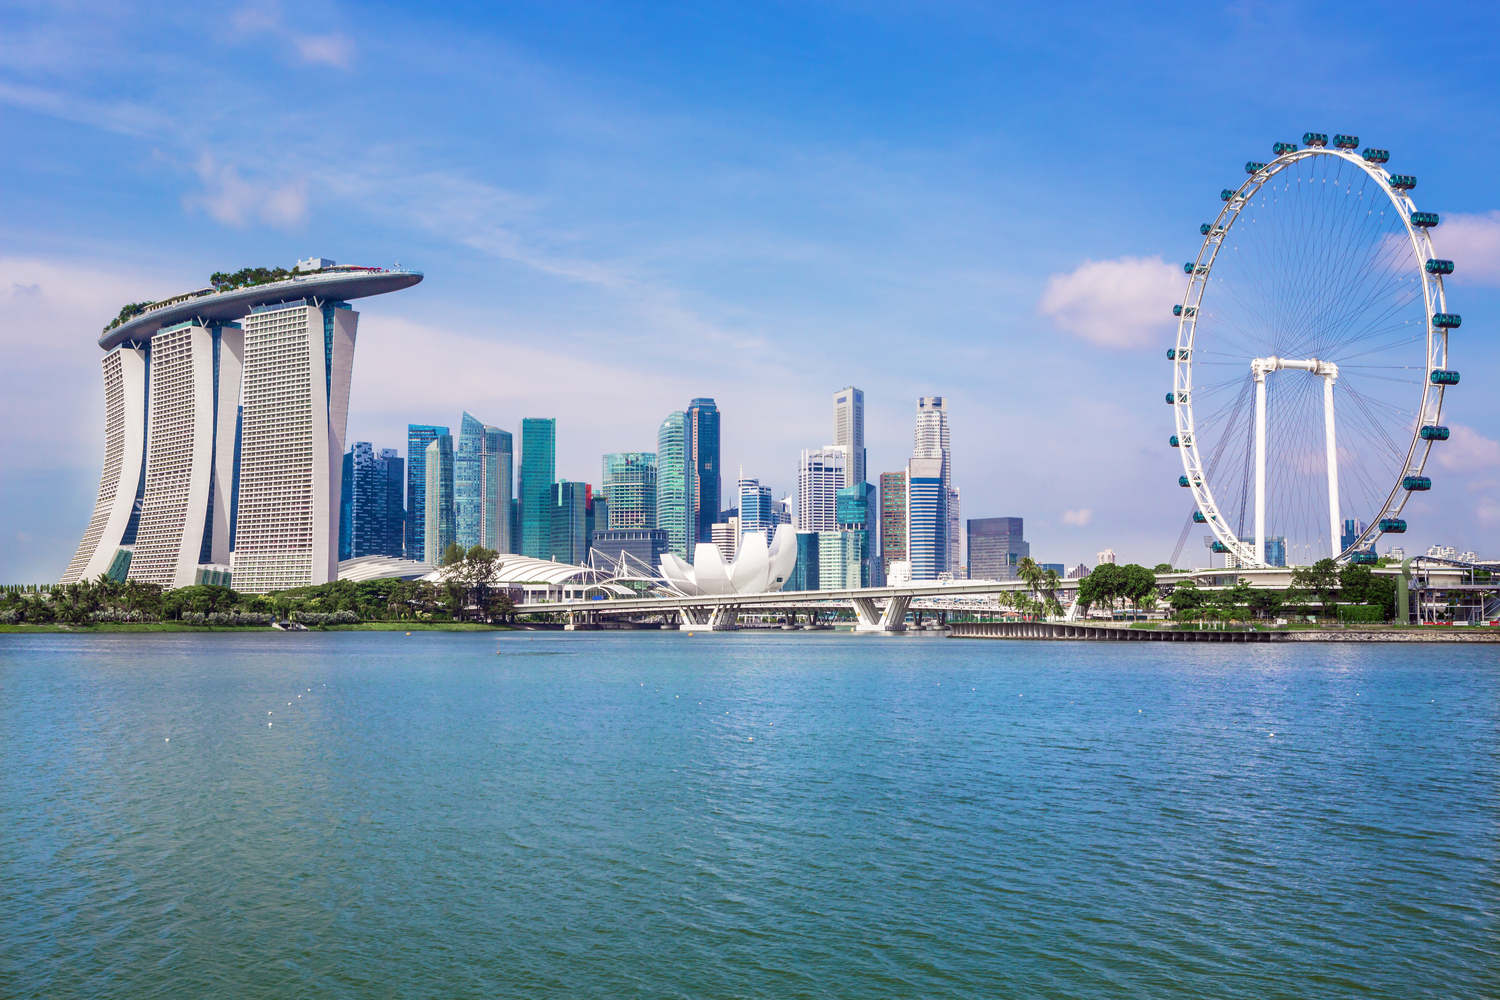 Singapore to Look at Crypto Use Cases With DBS, JPMorgan and Marketnode